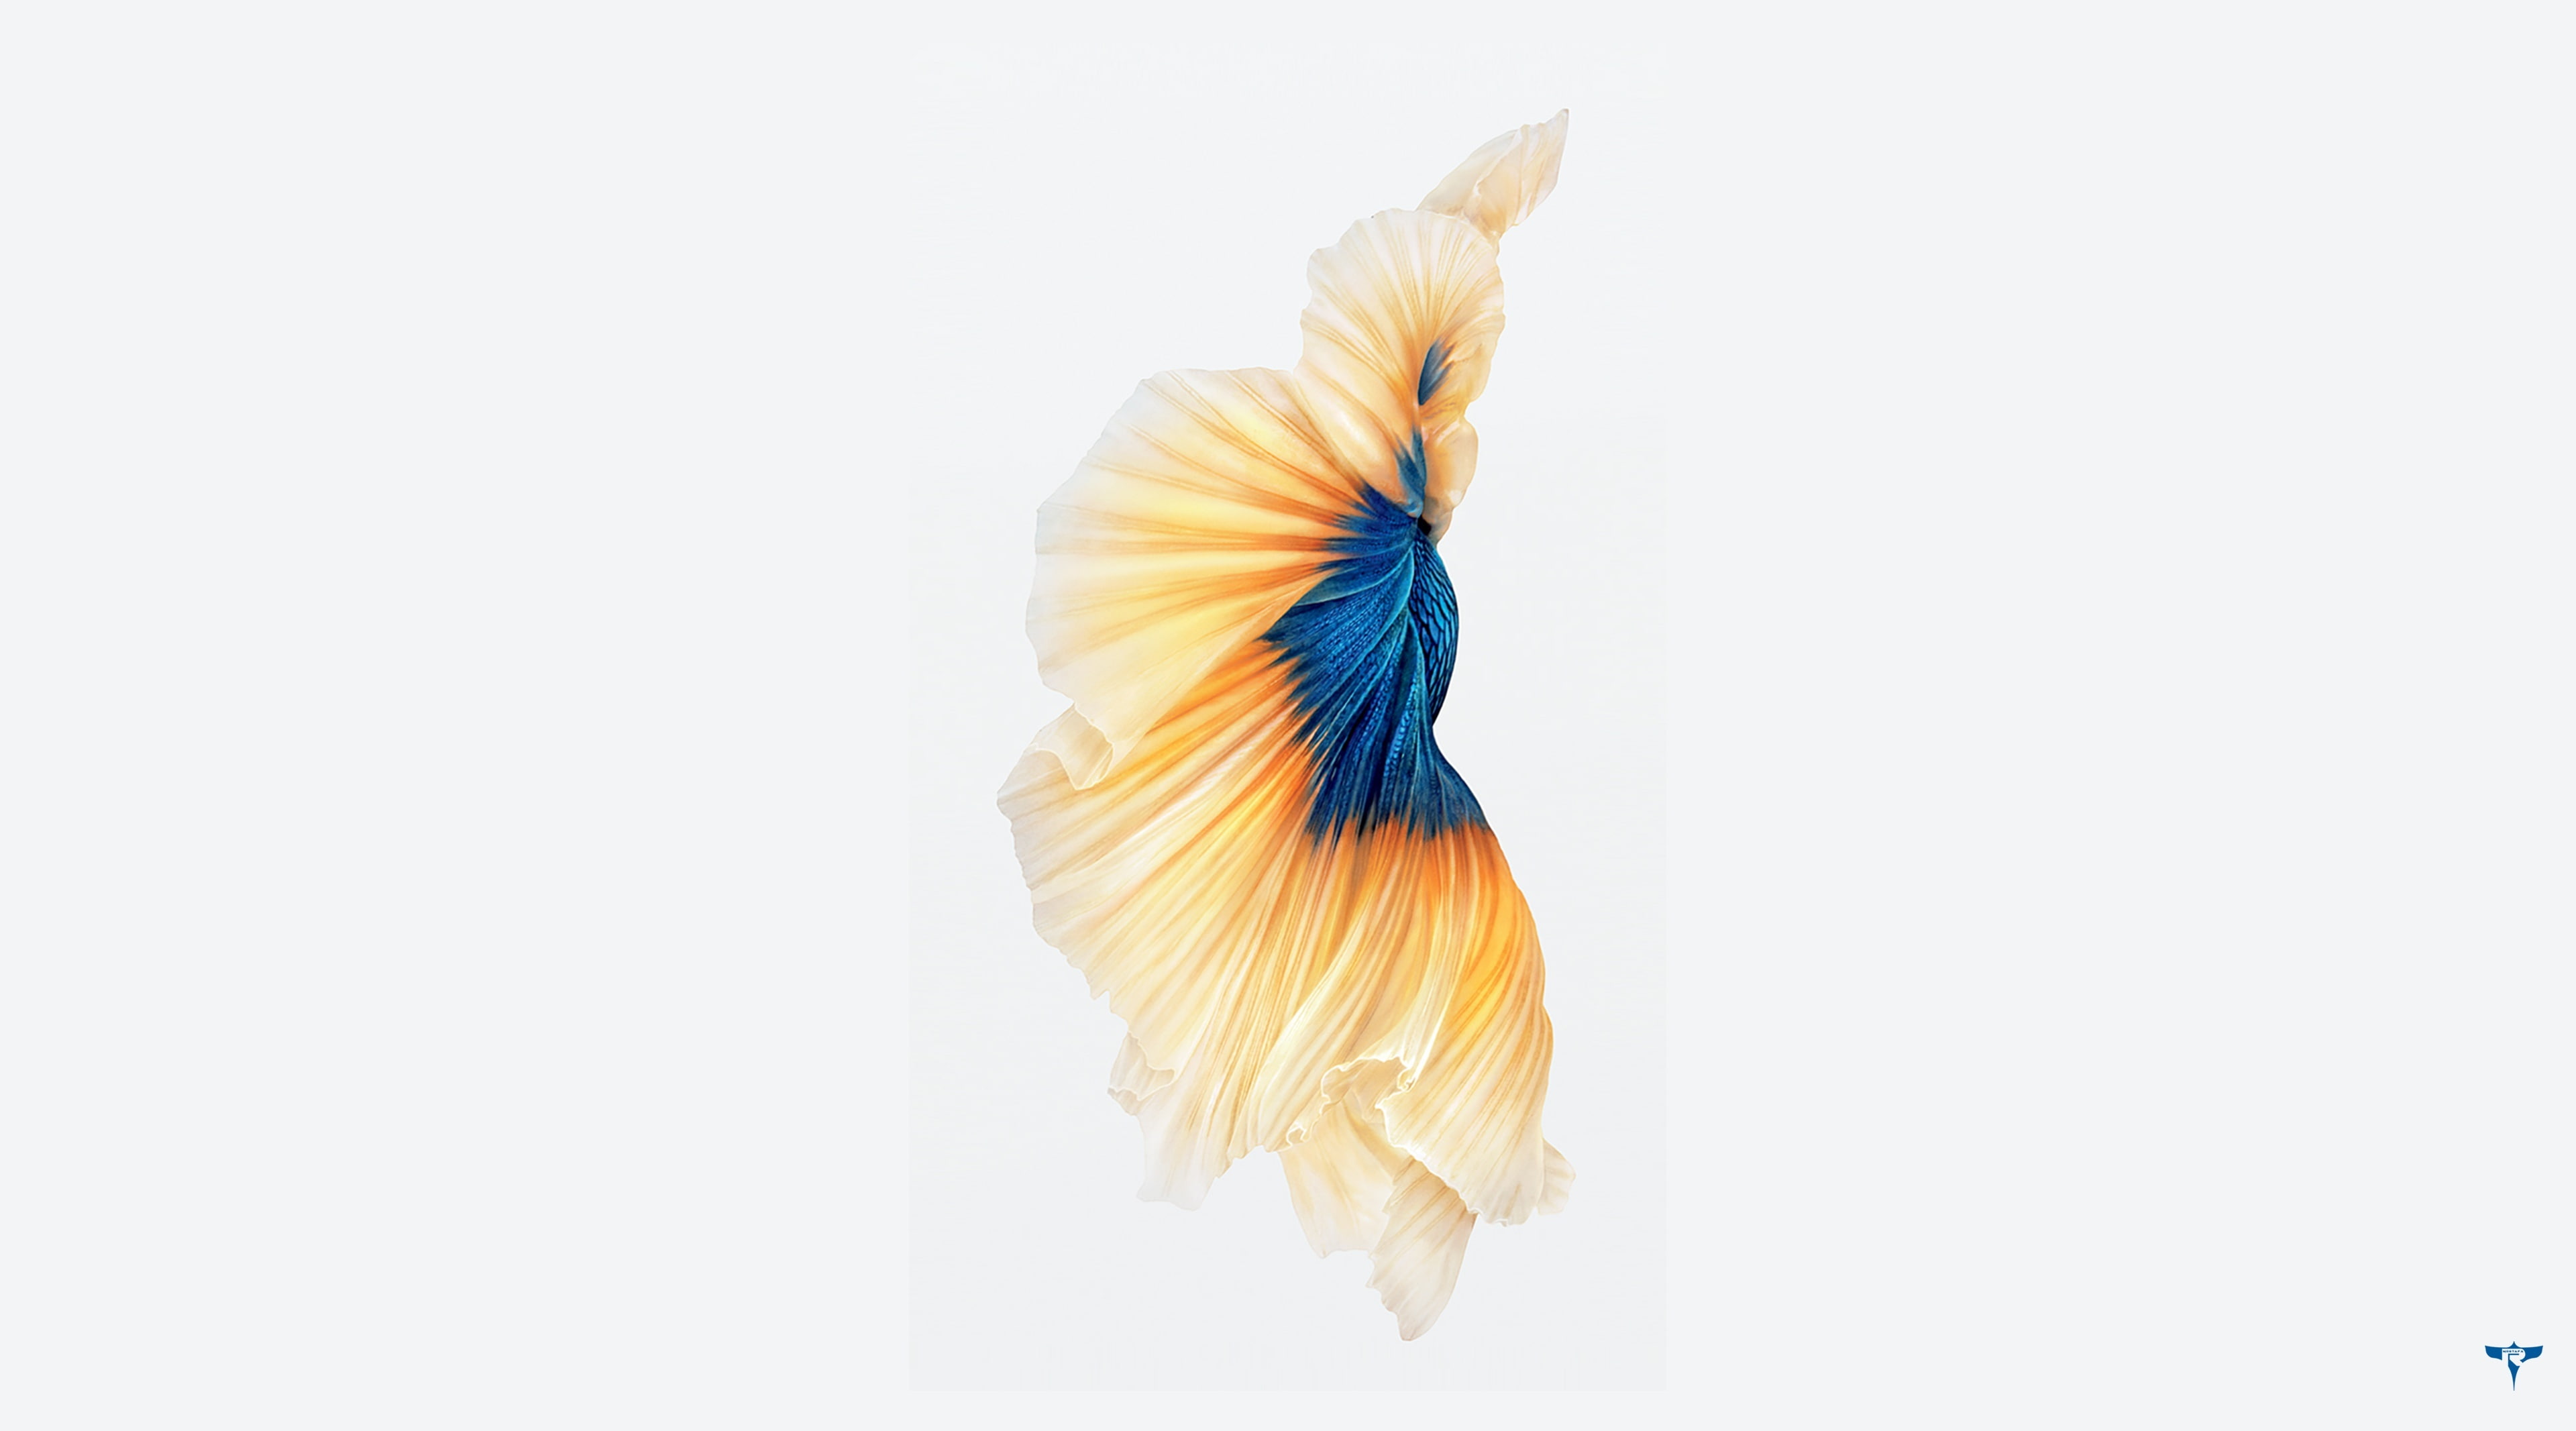 iphone 6s wallpaper,white,blue,yellow,turquoise,petal